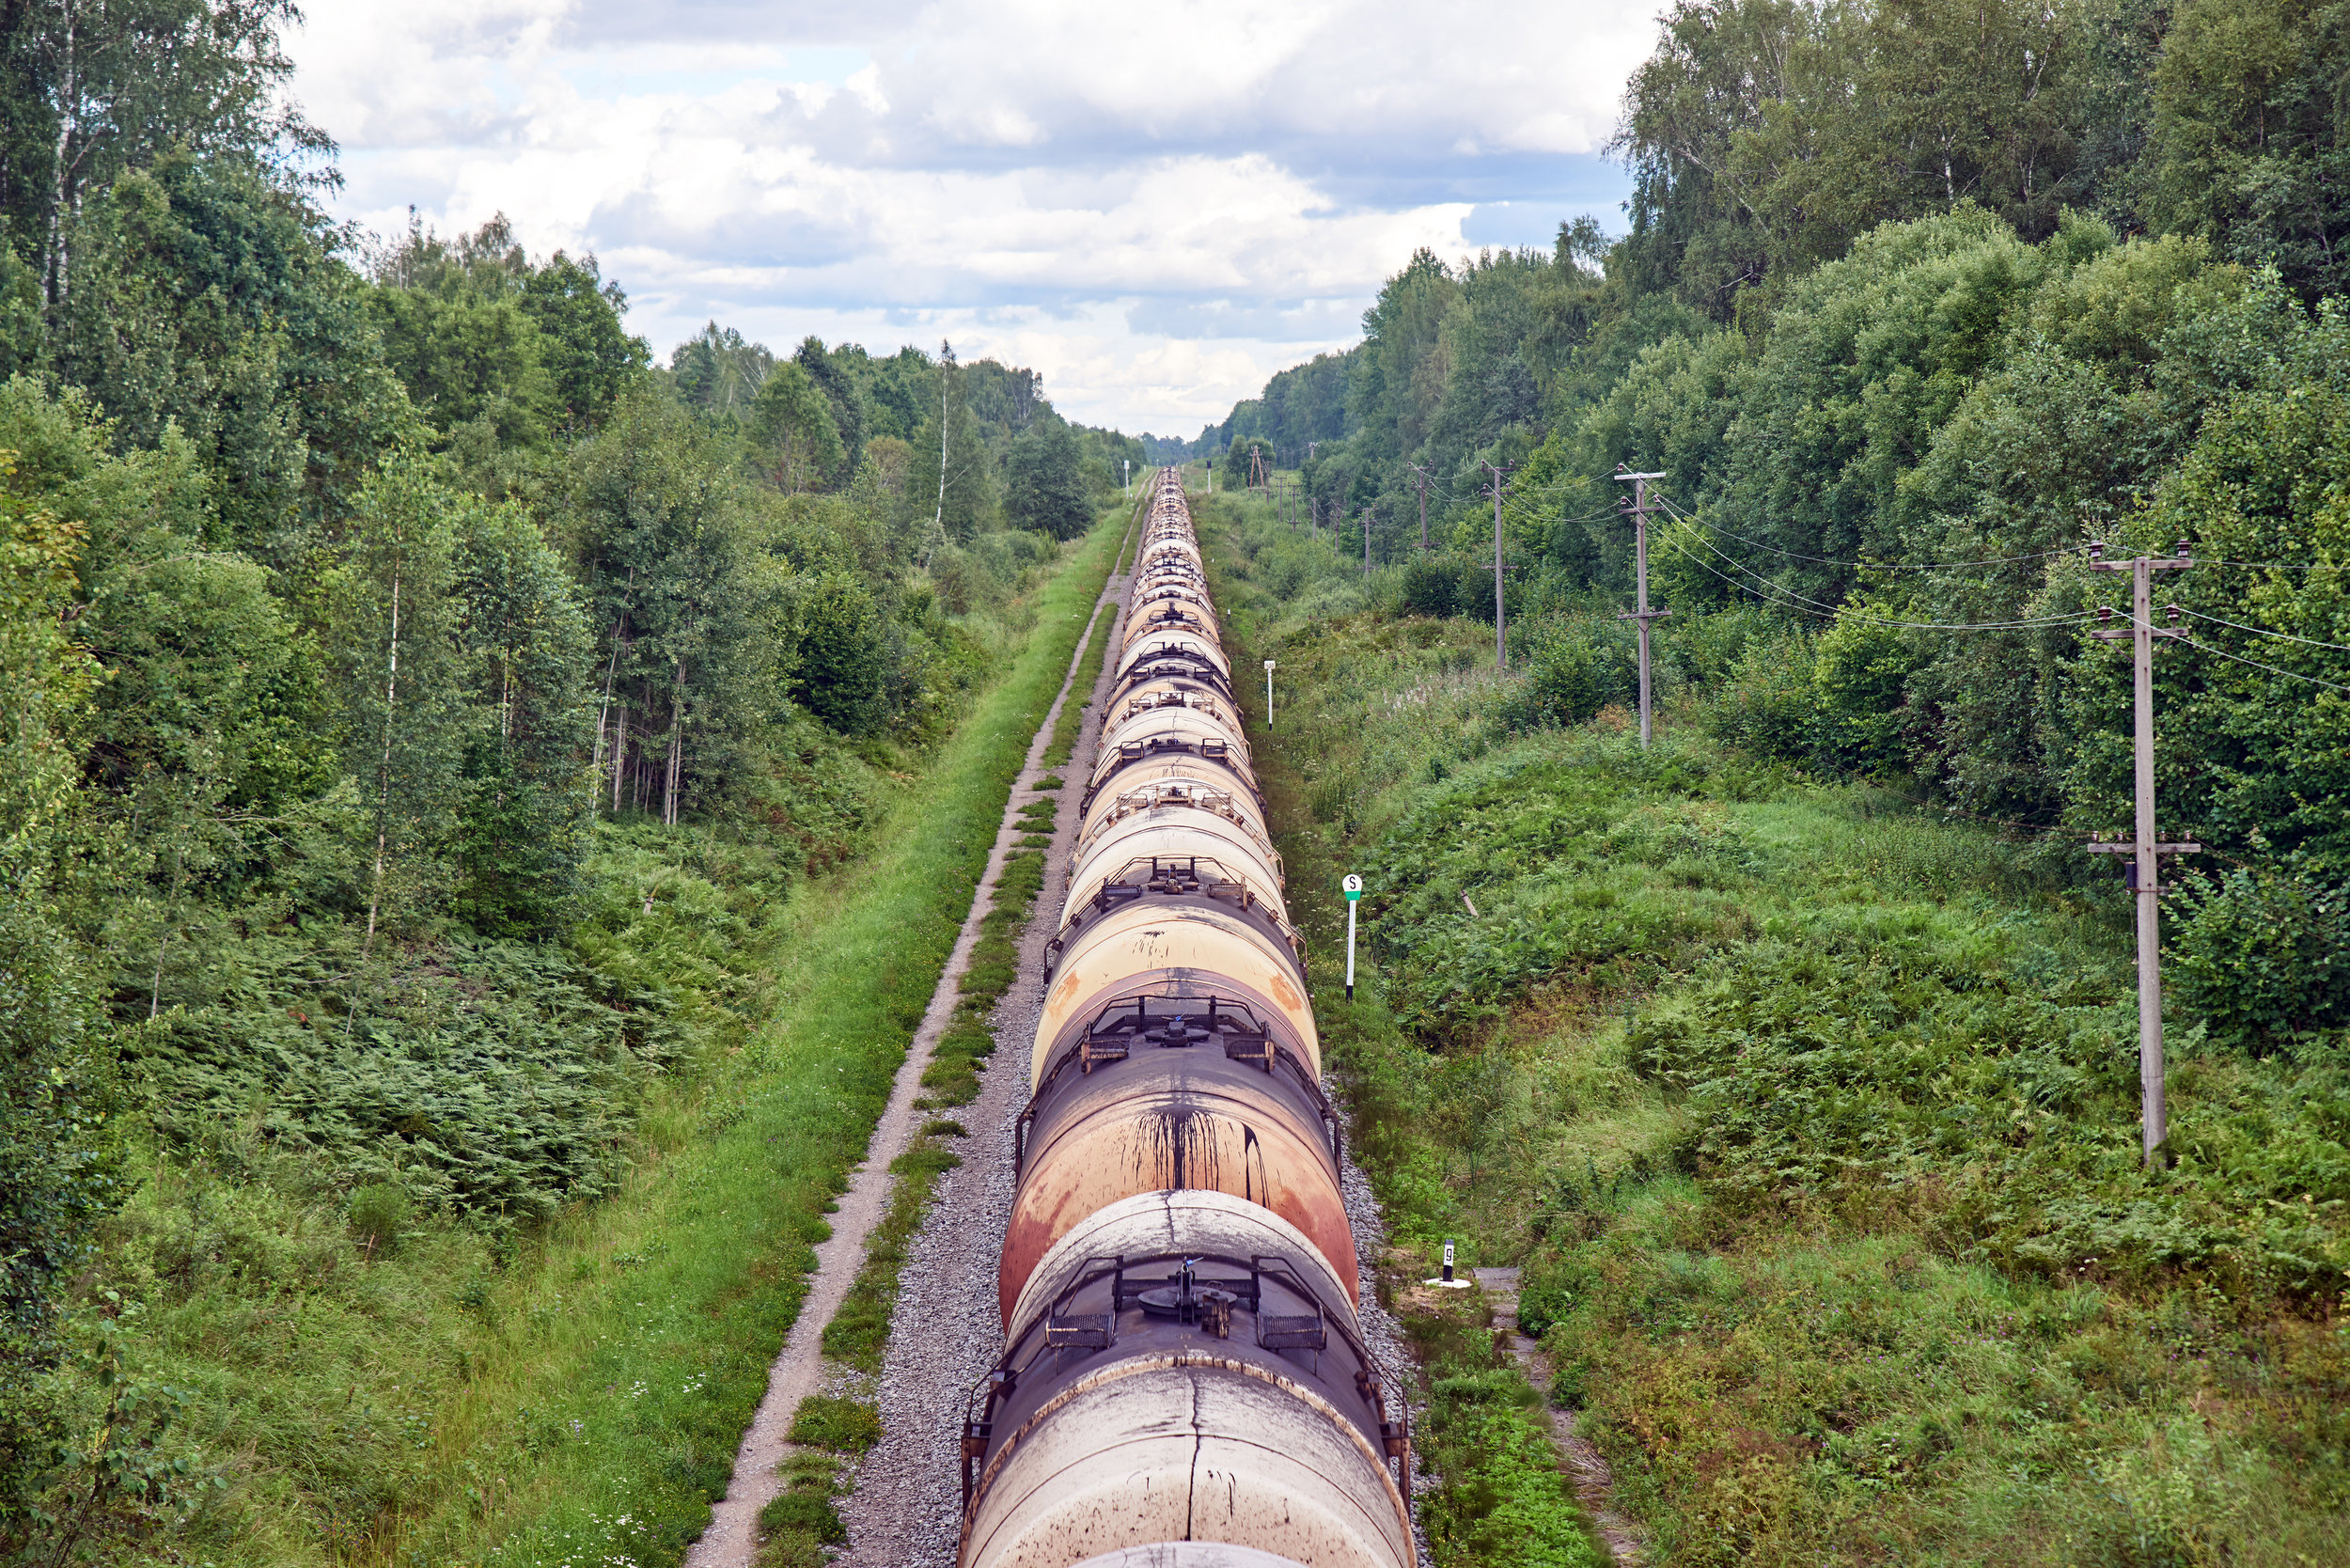 Set-of-train-tanks-with-oil-and-fuel-transport-by-rail---countryside-view-682538860_3866x2580.jpeg